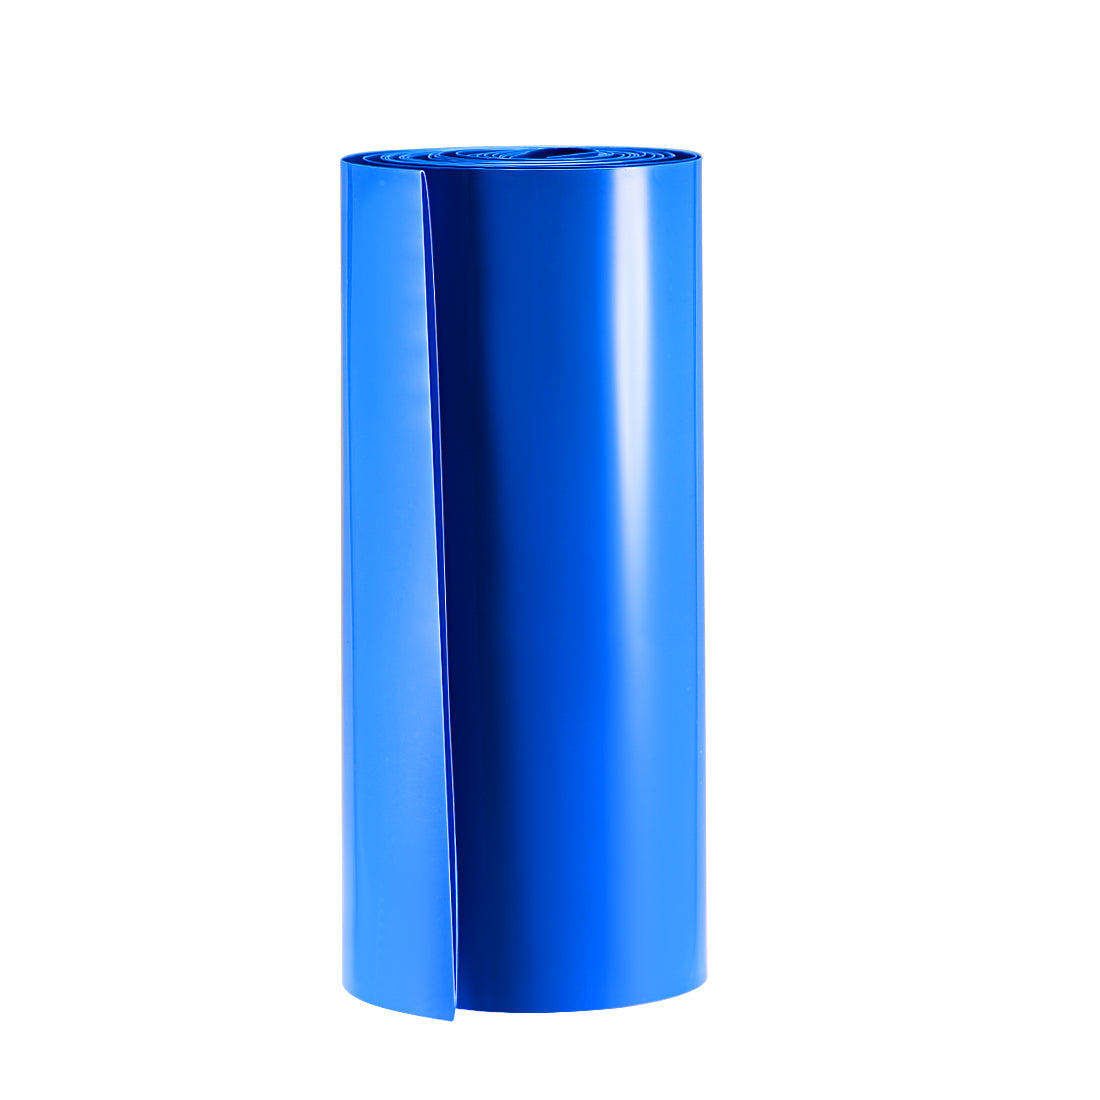 Uxcell Uxcell Battery Wrap, 240mm Width 3 Meters PVC Heat Shrink Tube Wraps Blue